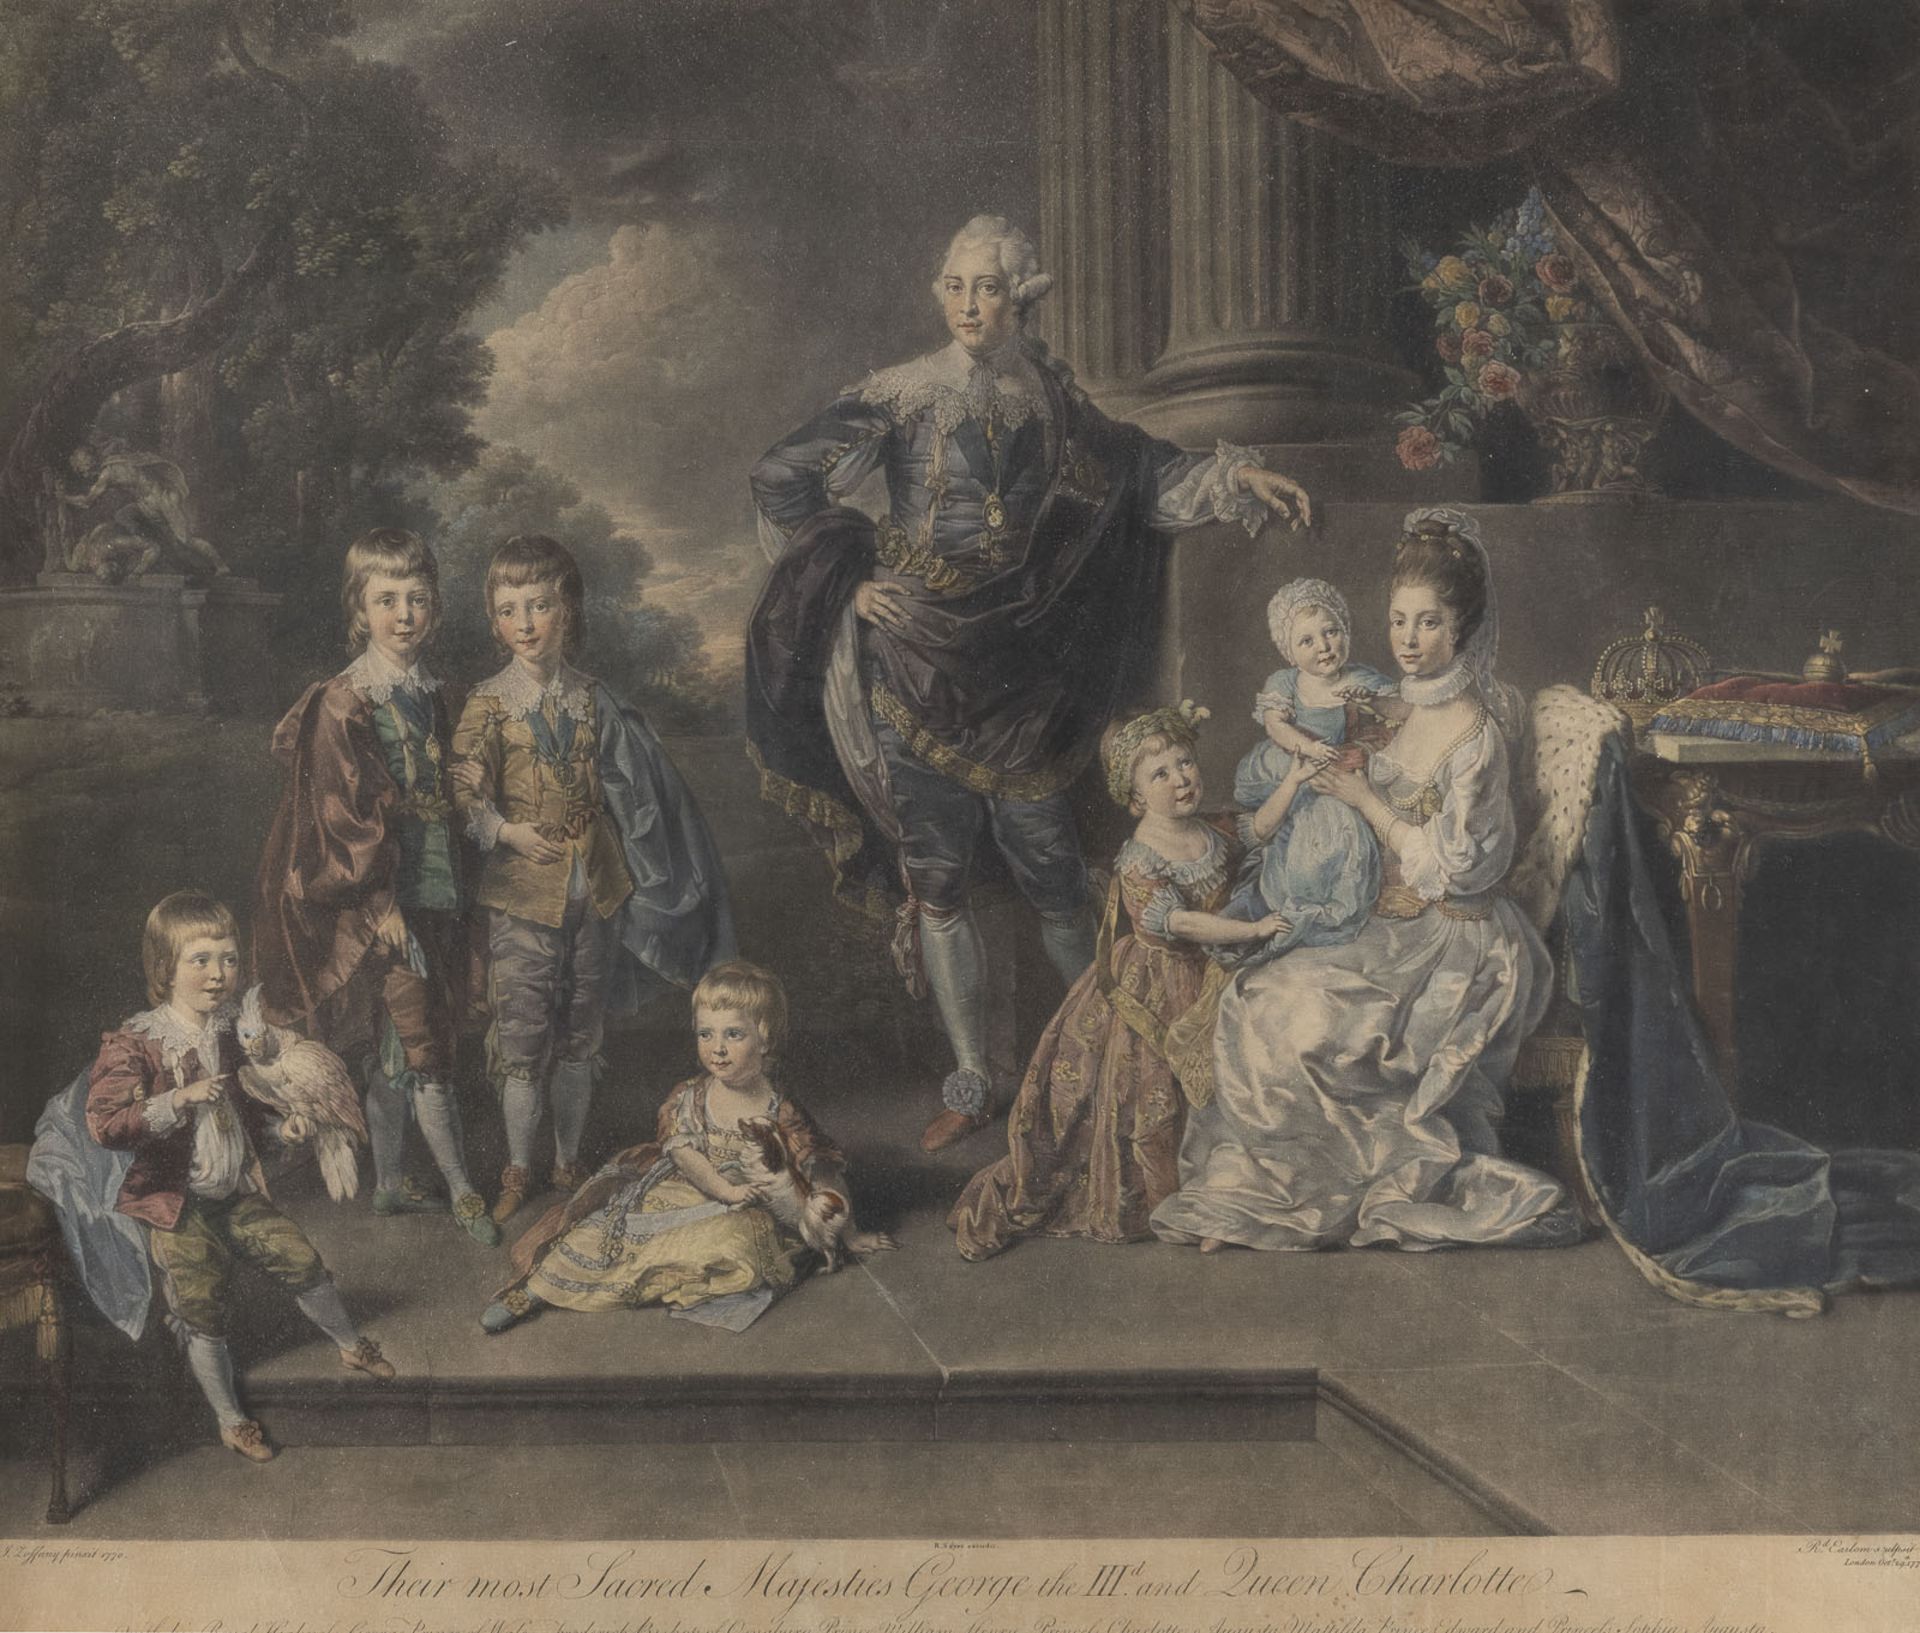 'THEIR MOST SACRED MAJESTIES GEORGE THE IIID AND QUEEN CHARLOTTE (...)' (NACH JOHANN JOSEPH ZOFFANY 